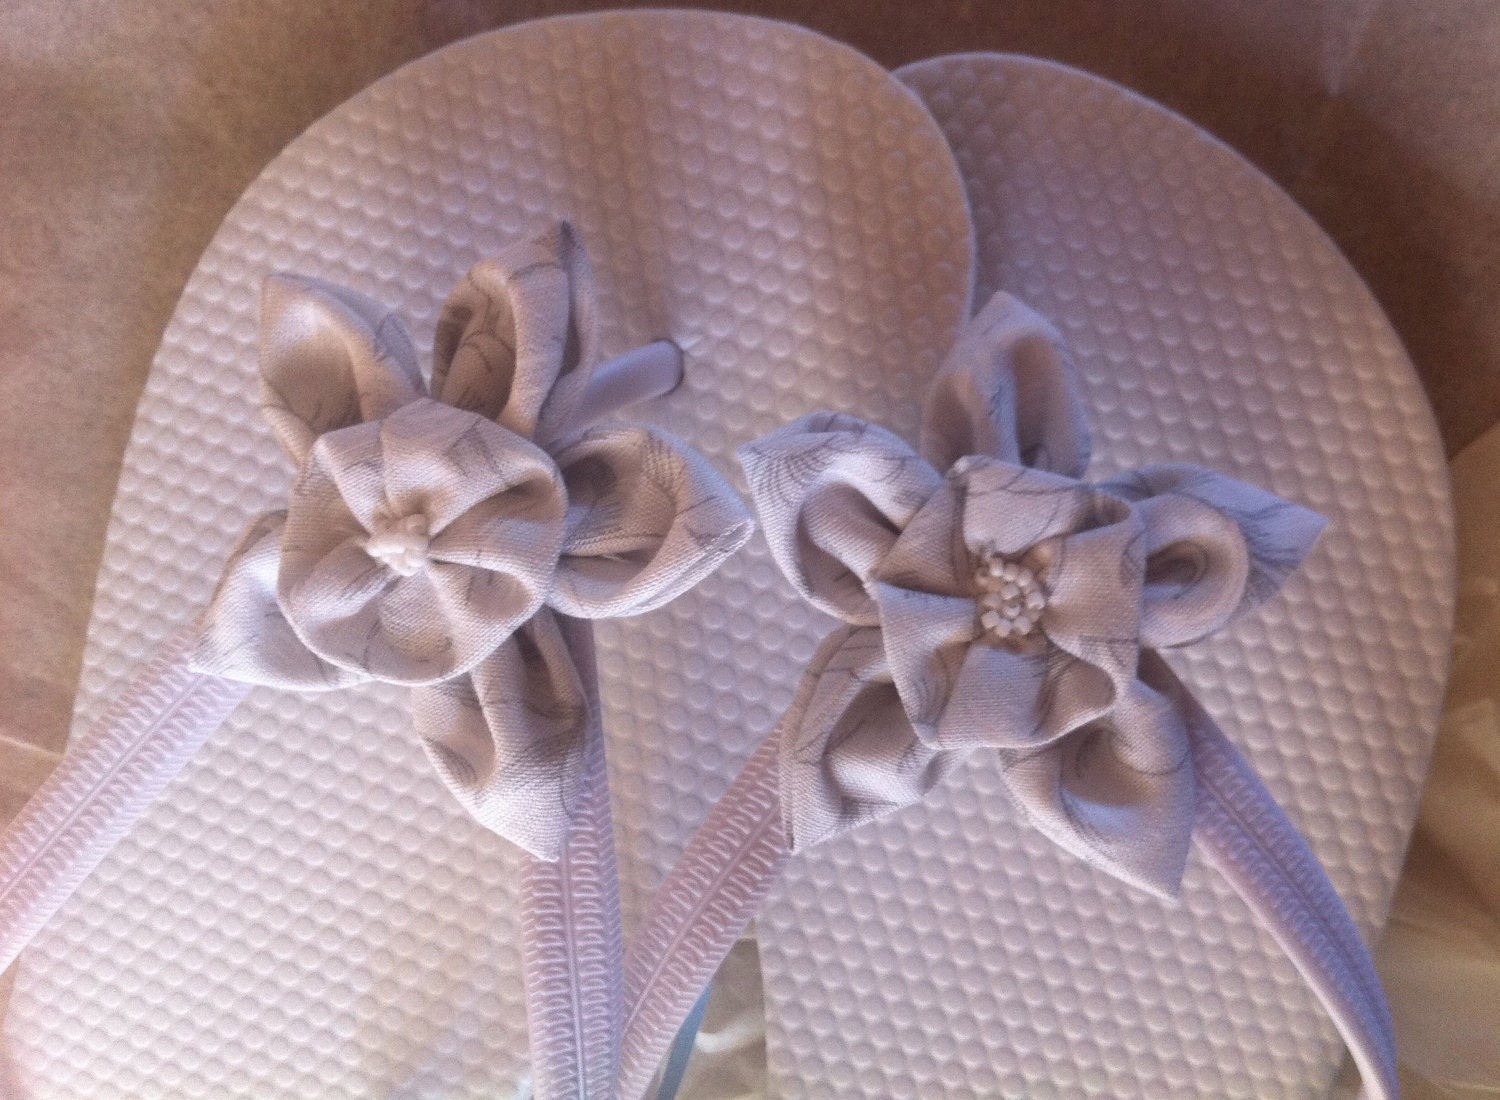 Women's White Flip Flops with Fabric Flowers